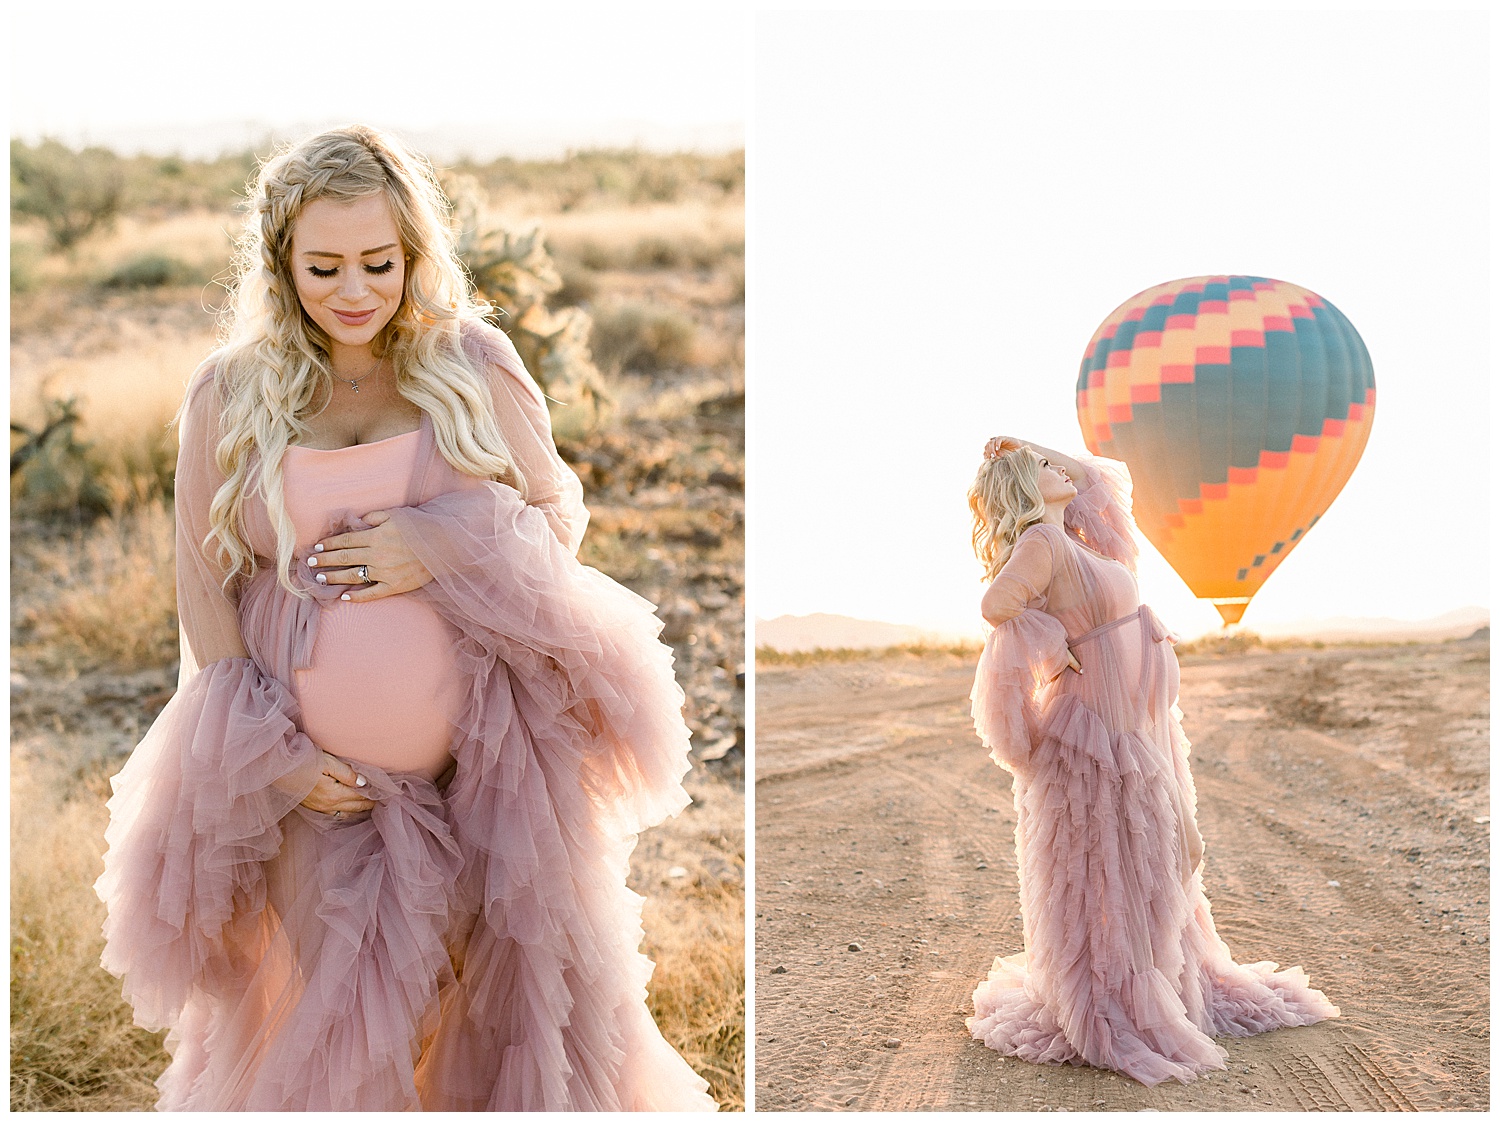 Hot Air Balloon Maternity Session in the Desert with Pink Gown Phoenix Arizona